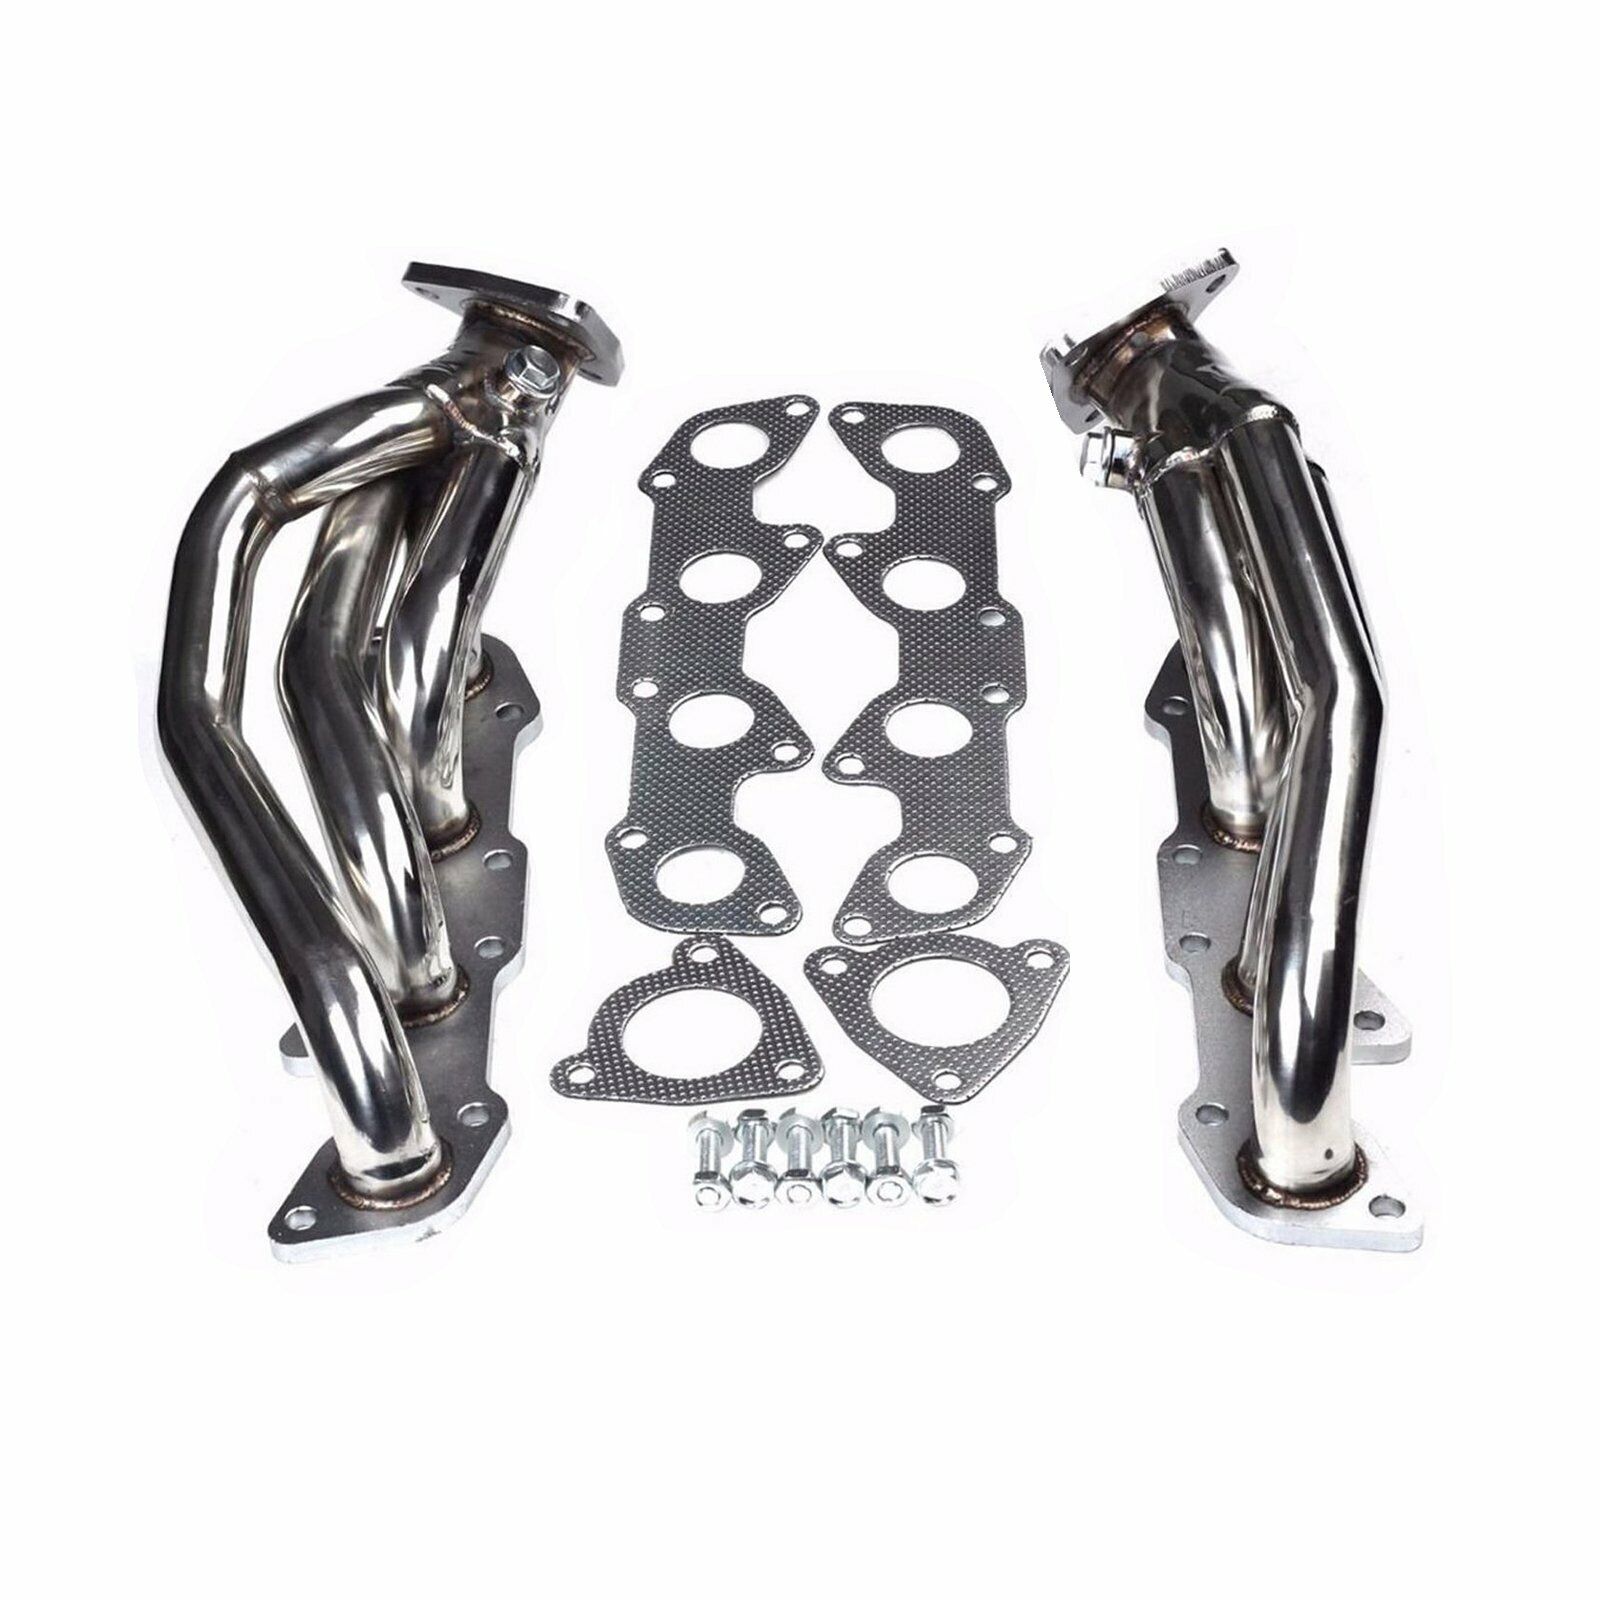 For 00-04 Toyota Tundra Sequoia 4.7L V8 Stainless Racing Header Exhuast Manifold